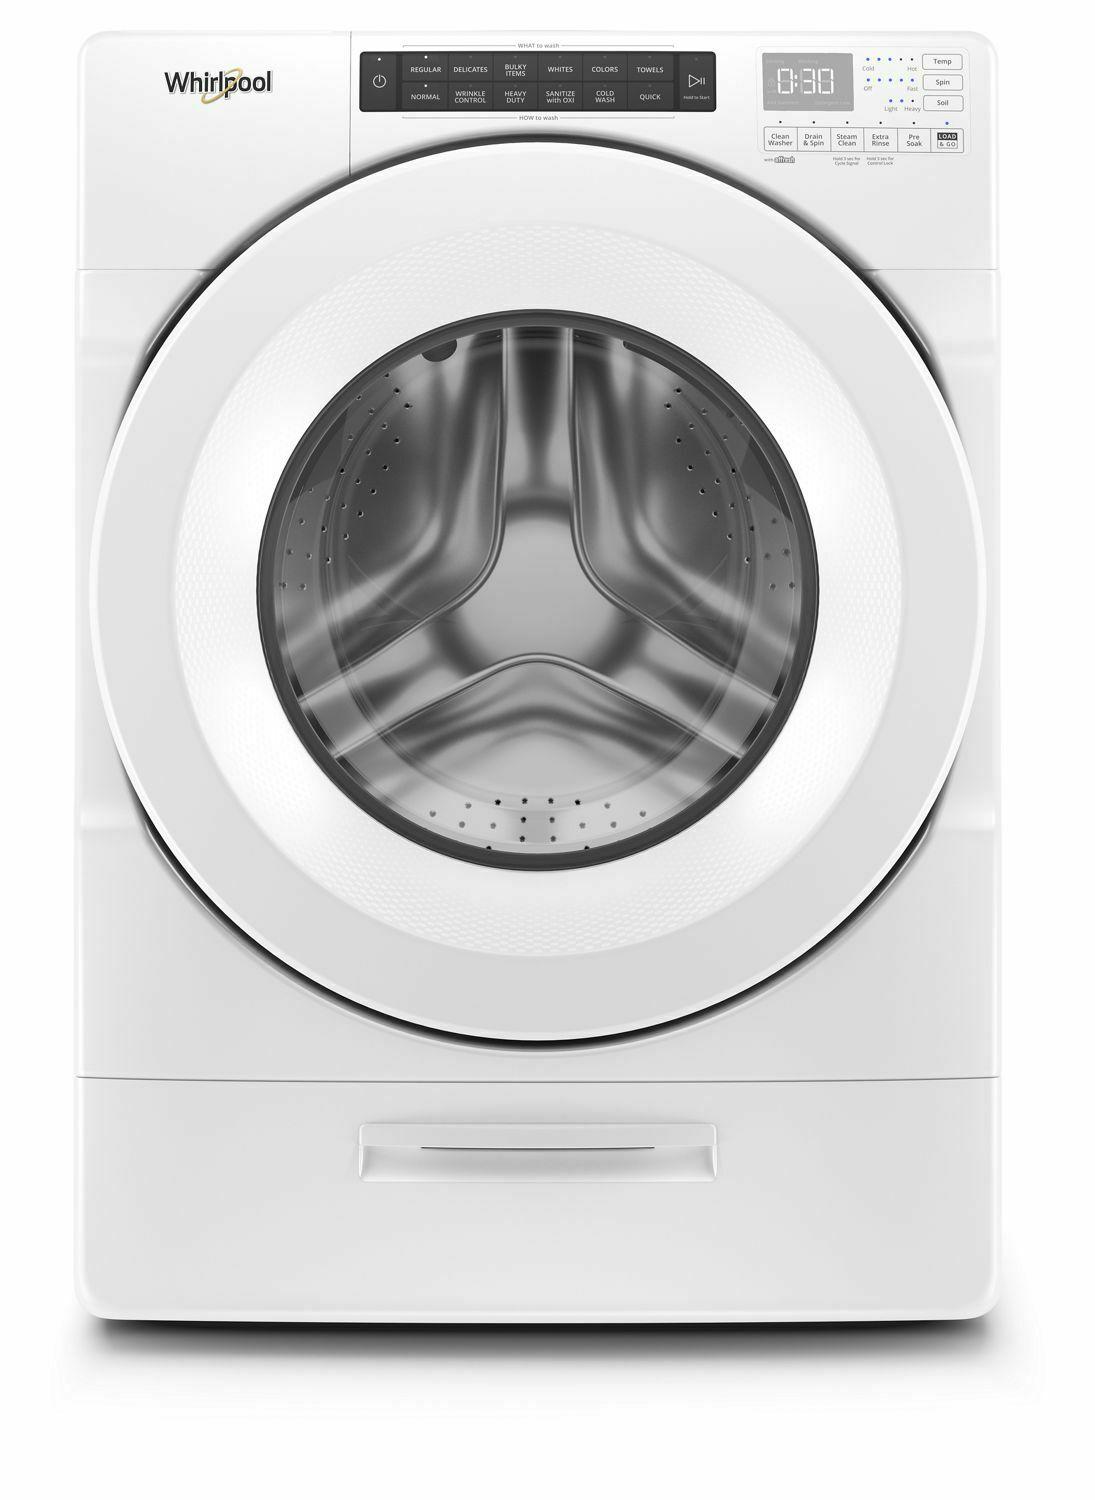 Whirlpool 4.5 cu. ft. Closet-Depth Front Load Washer with Load